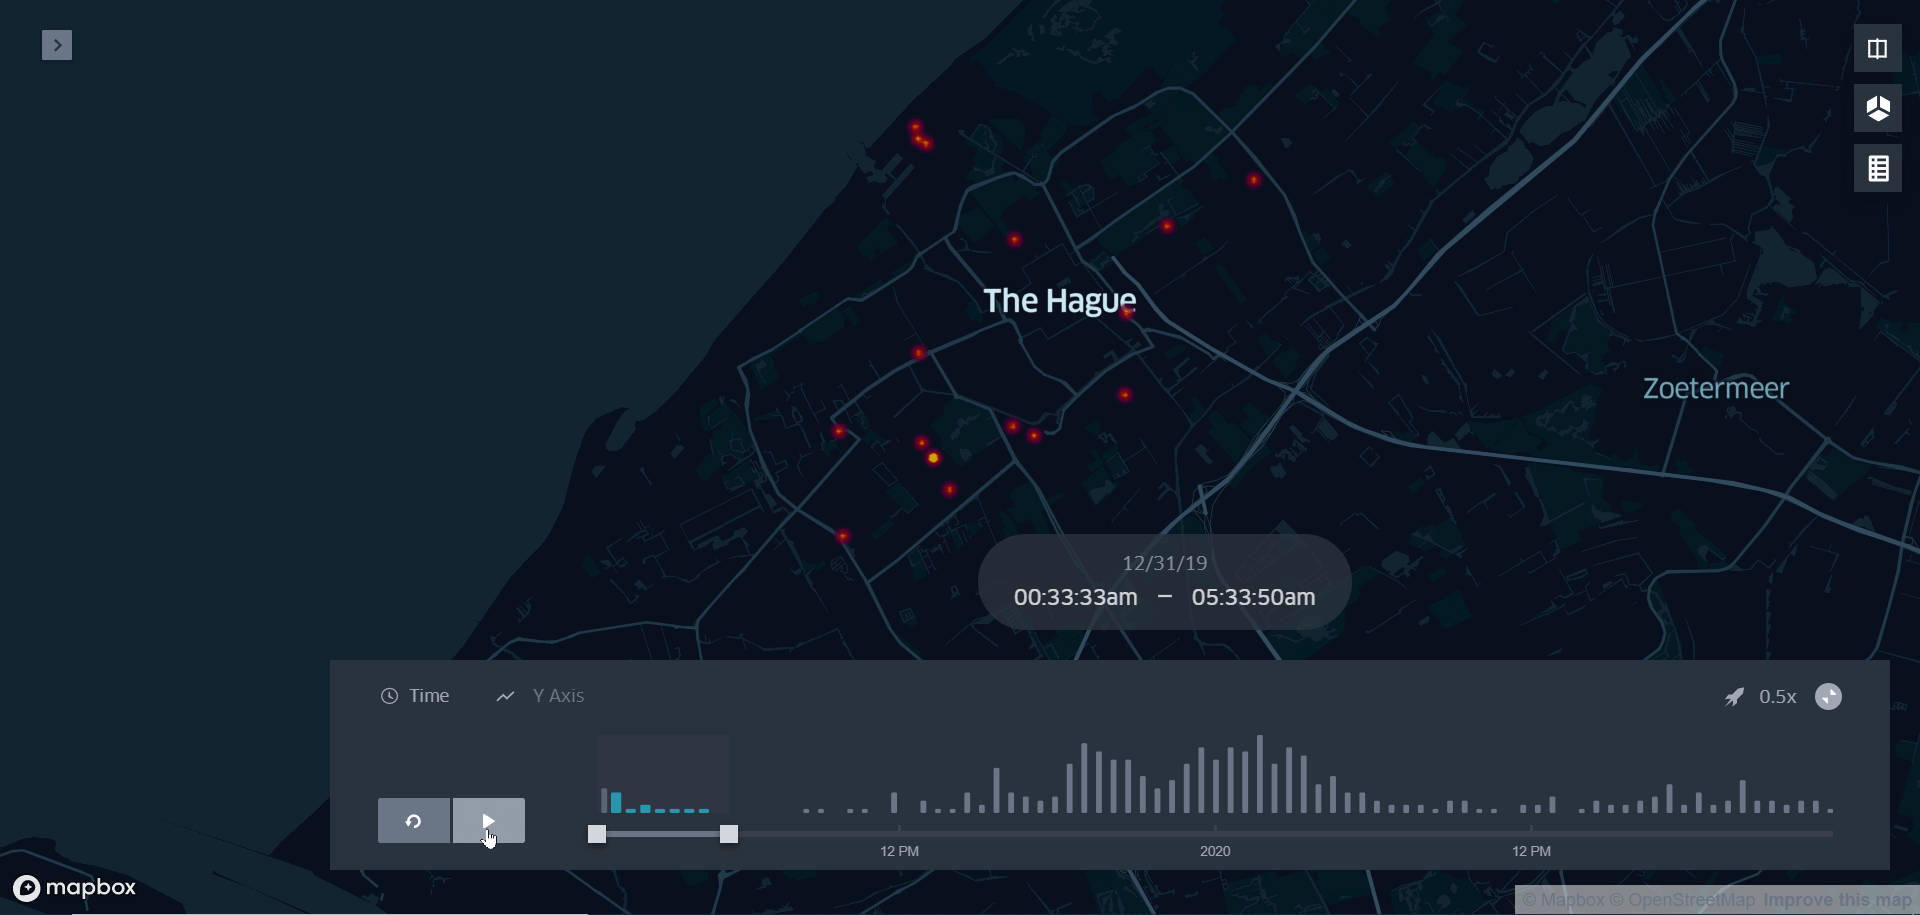 Visualisation of firefighter calls in The Hague leading up to and directly after the new year’s eve.